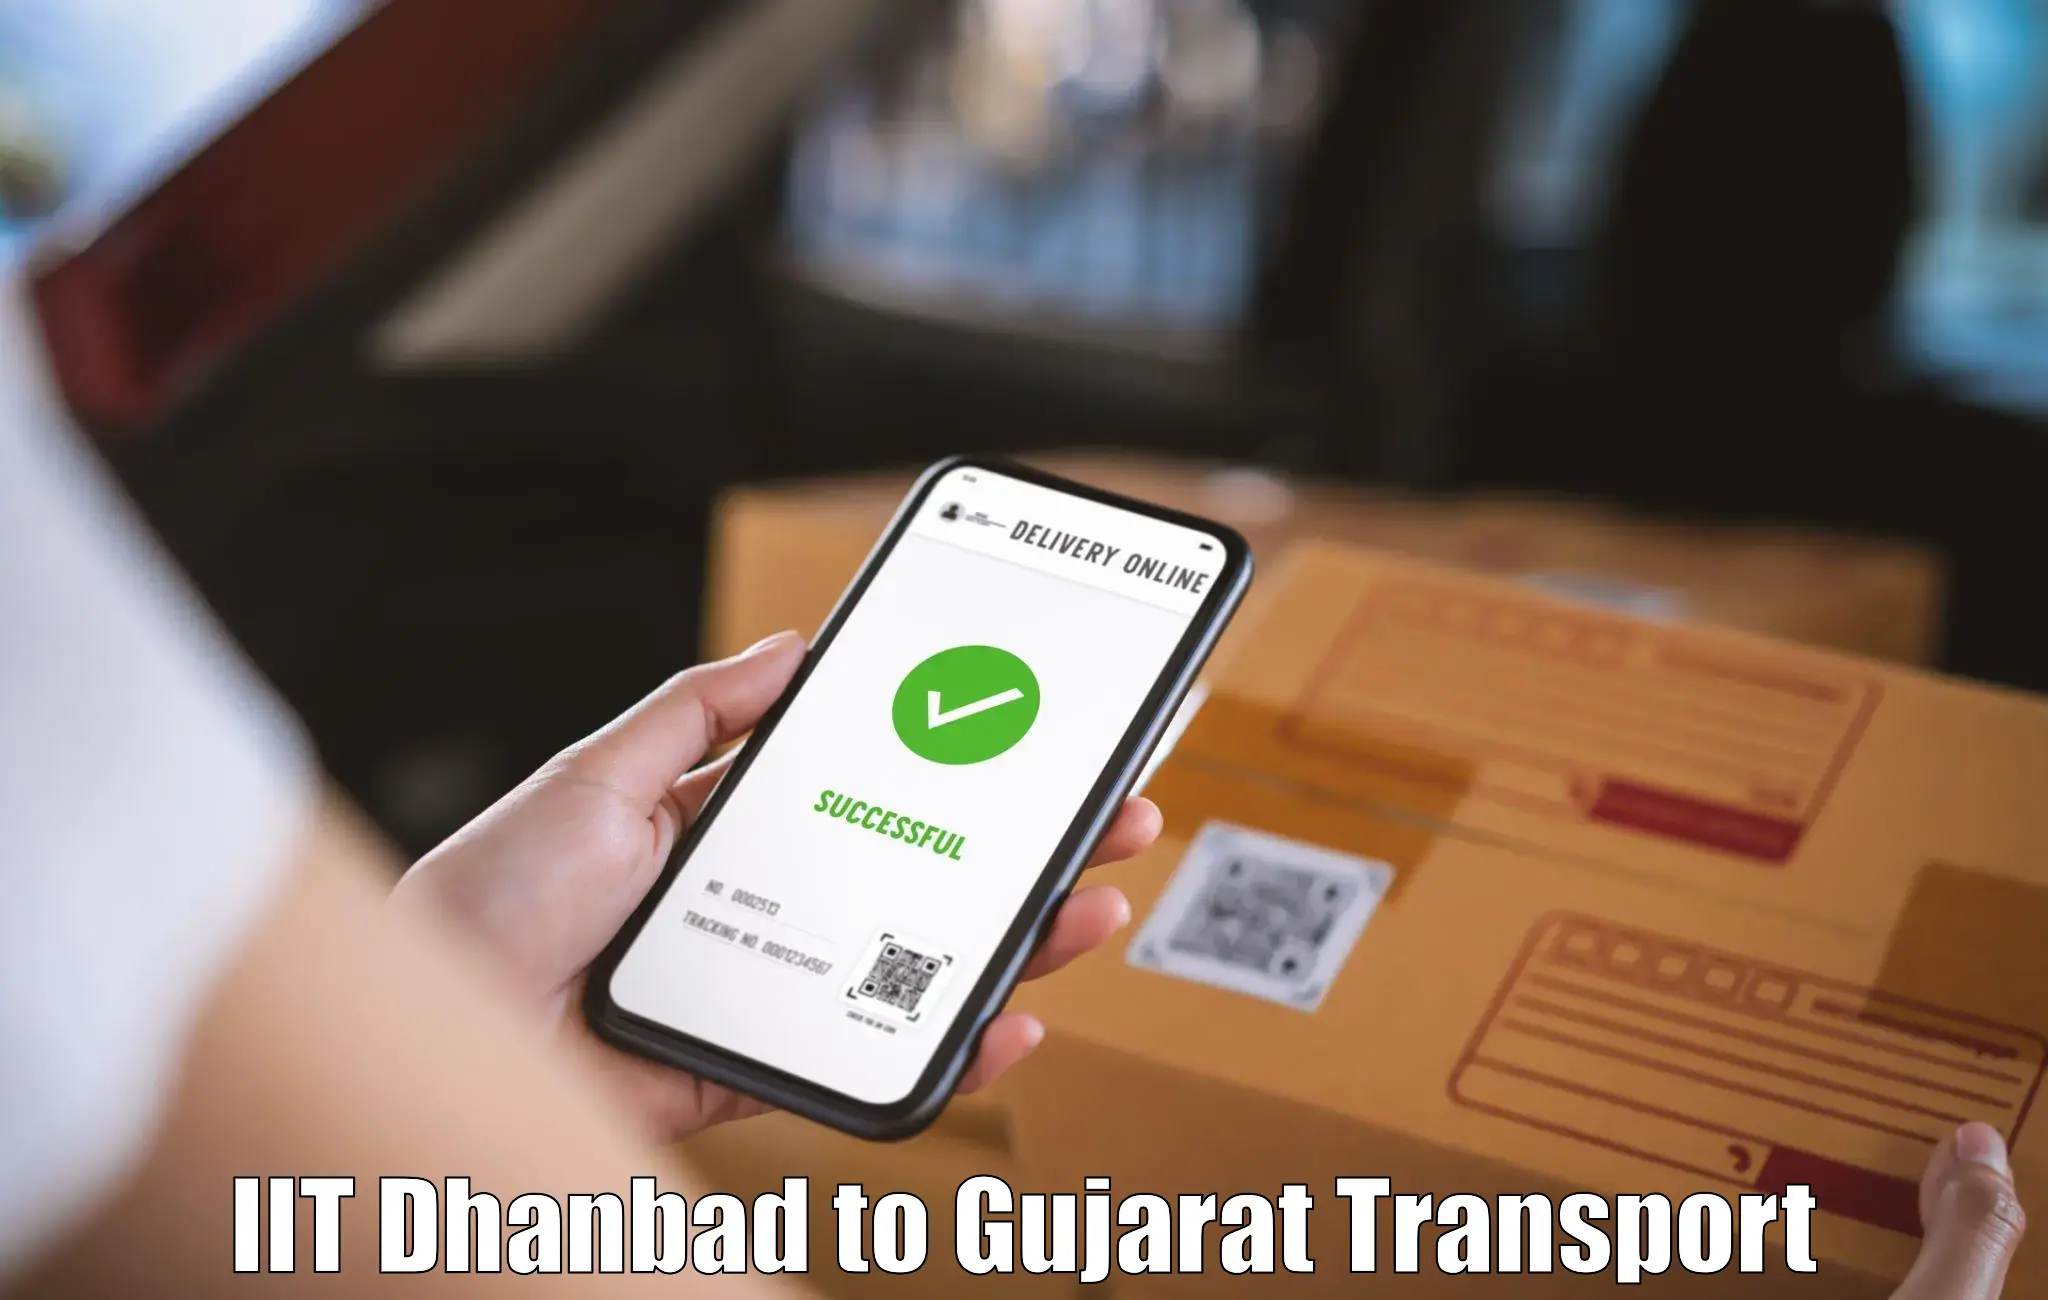 Road transport services in IIT Dhanbad to Dholera